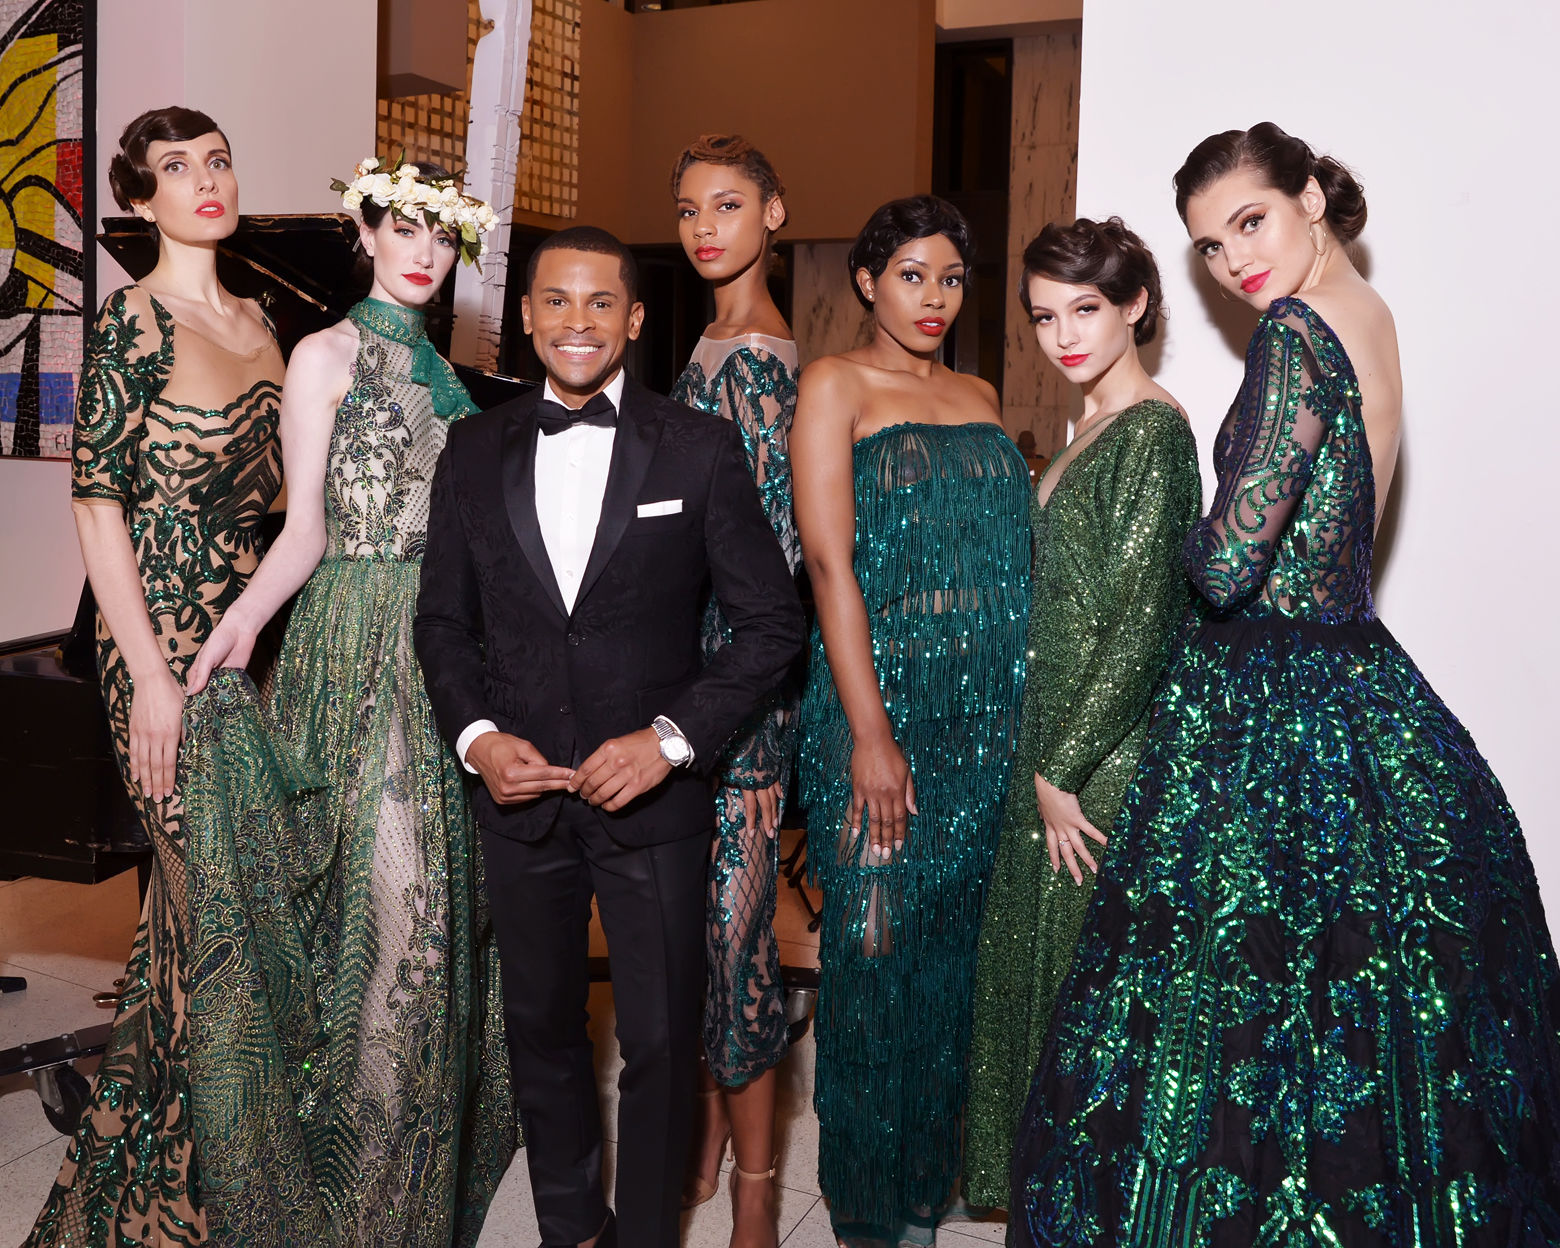 Models pose with host Guy Lambert of WPGC radio following the runway show at DC Fashion Week's 2018 International Couture Collections at the Embassy of France